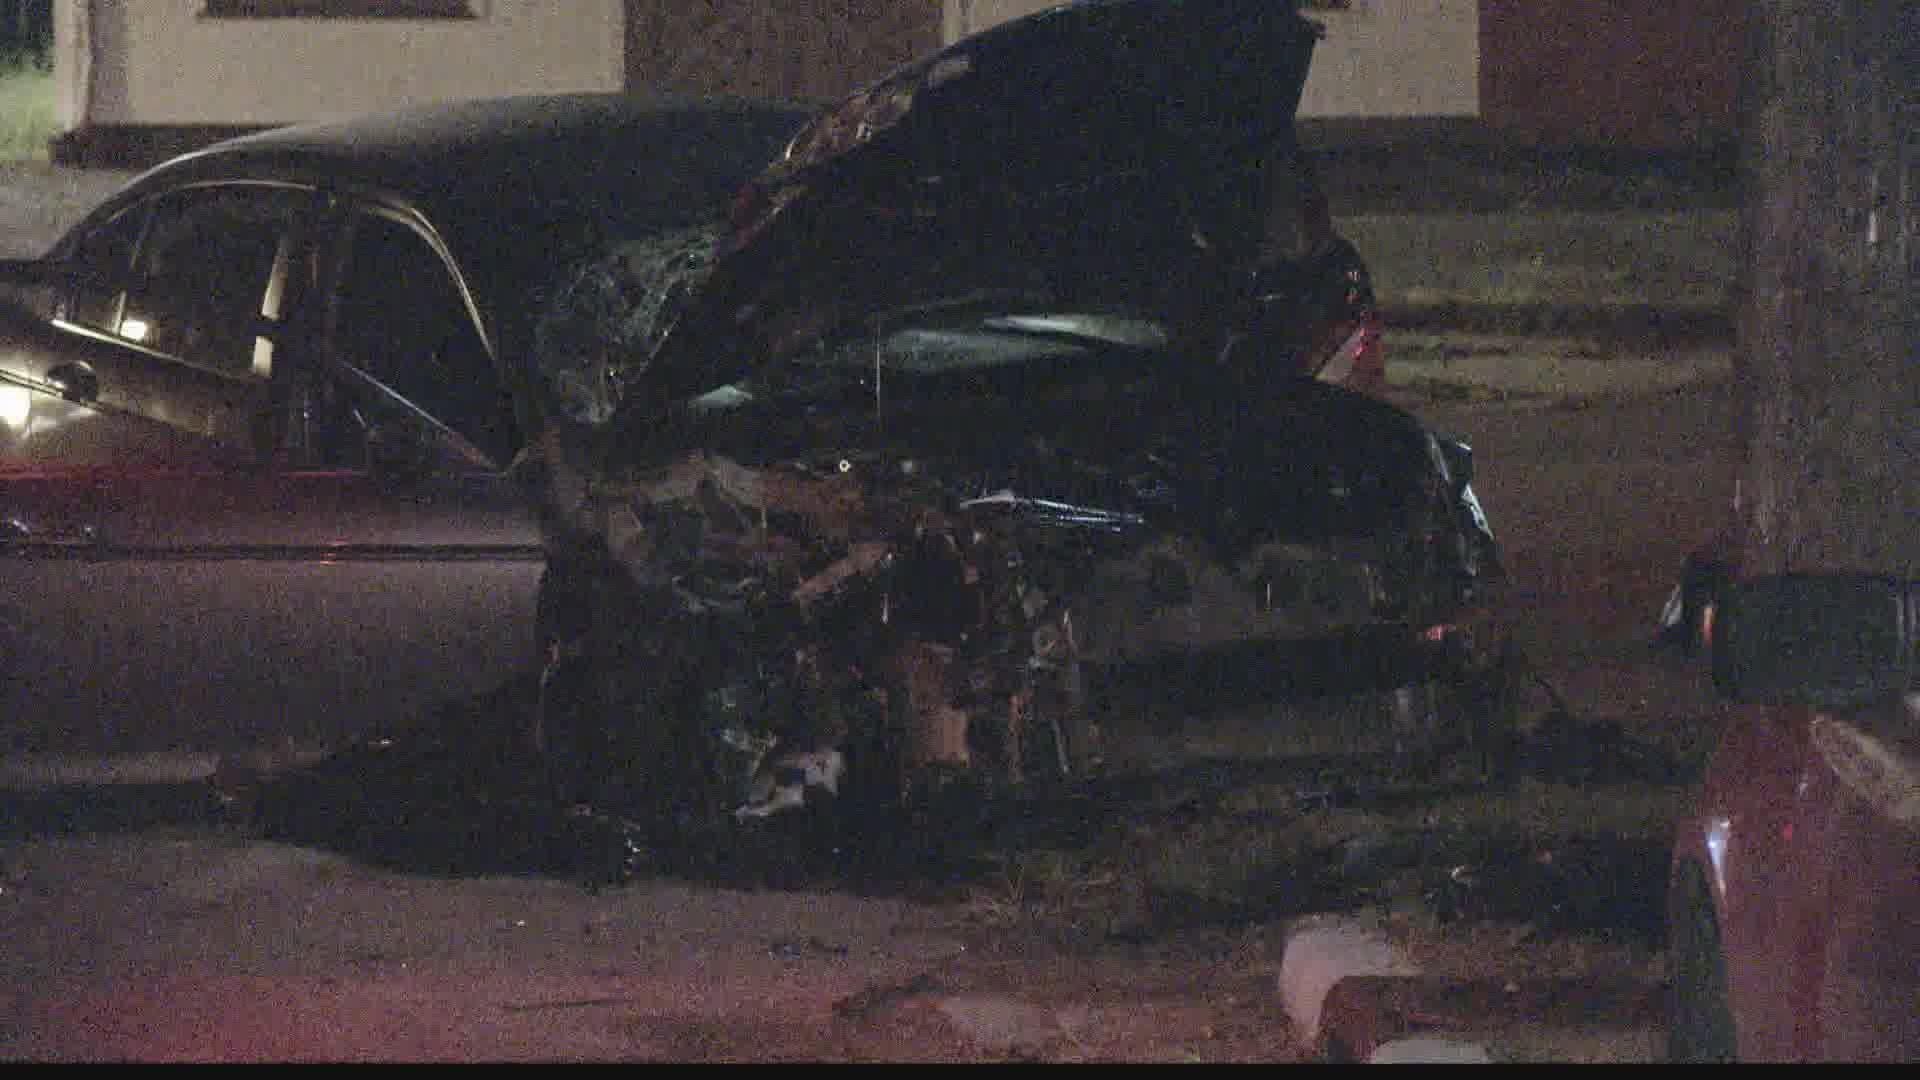 Police said someone in a car fired shots into another car, hitting two people inside, and that car ended up crashing into a pole near 16th Street and Emerson Avenue.